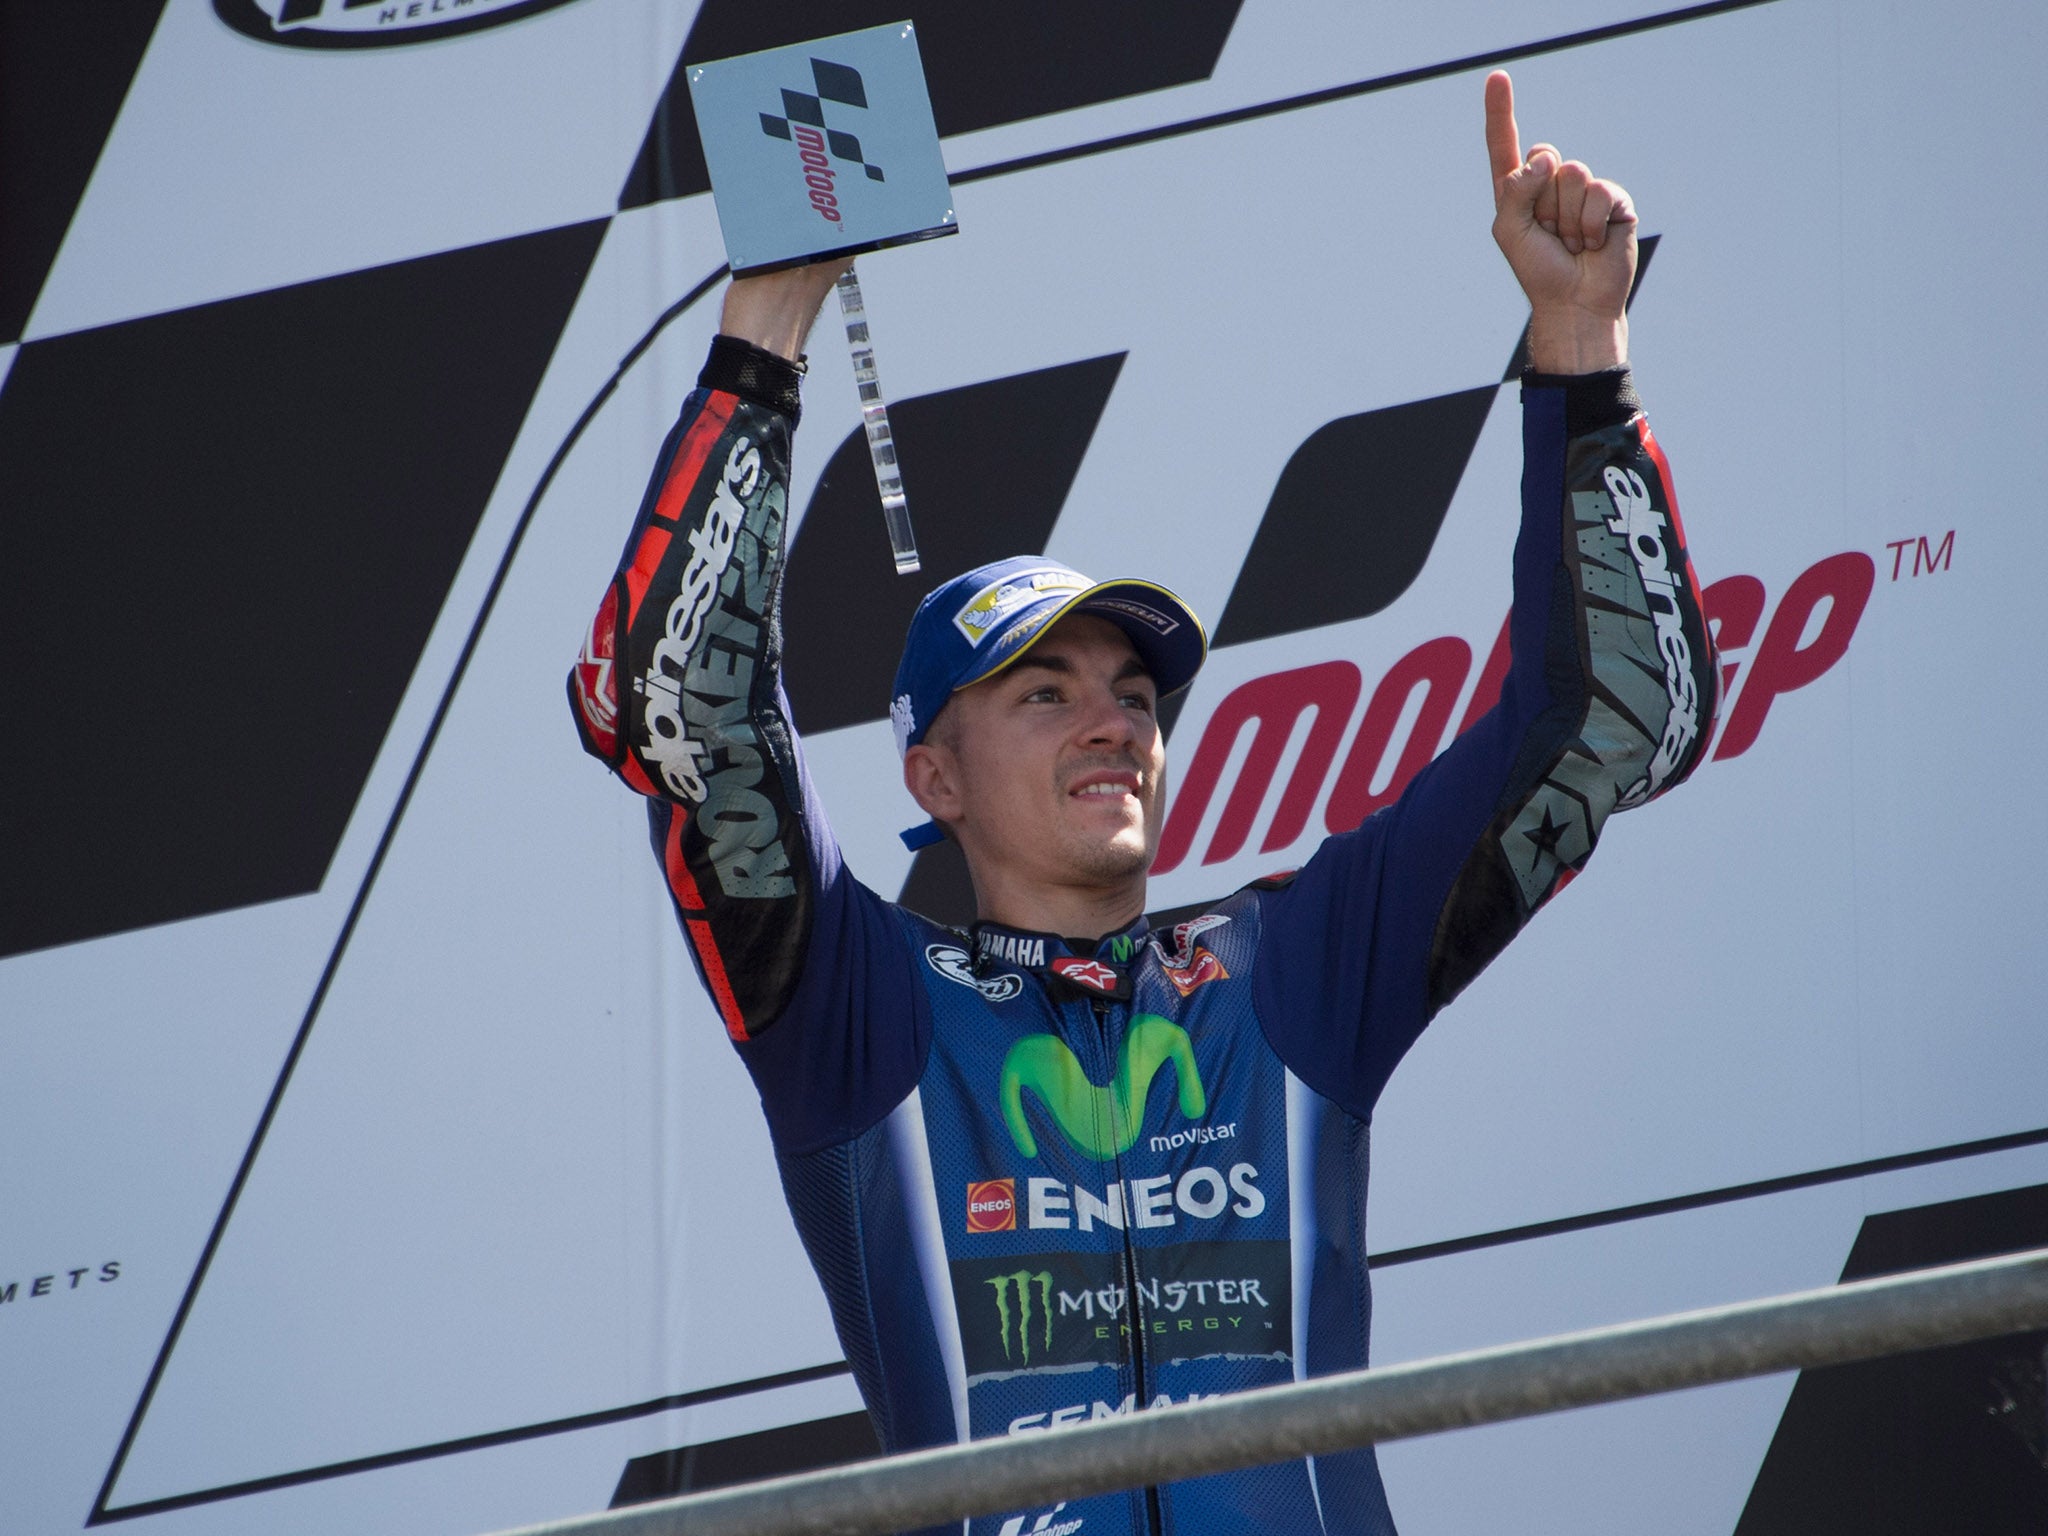 Maverick Vinales is now leading the World Championship